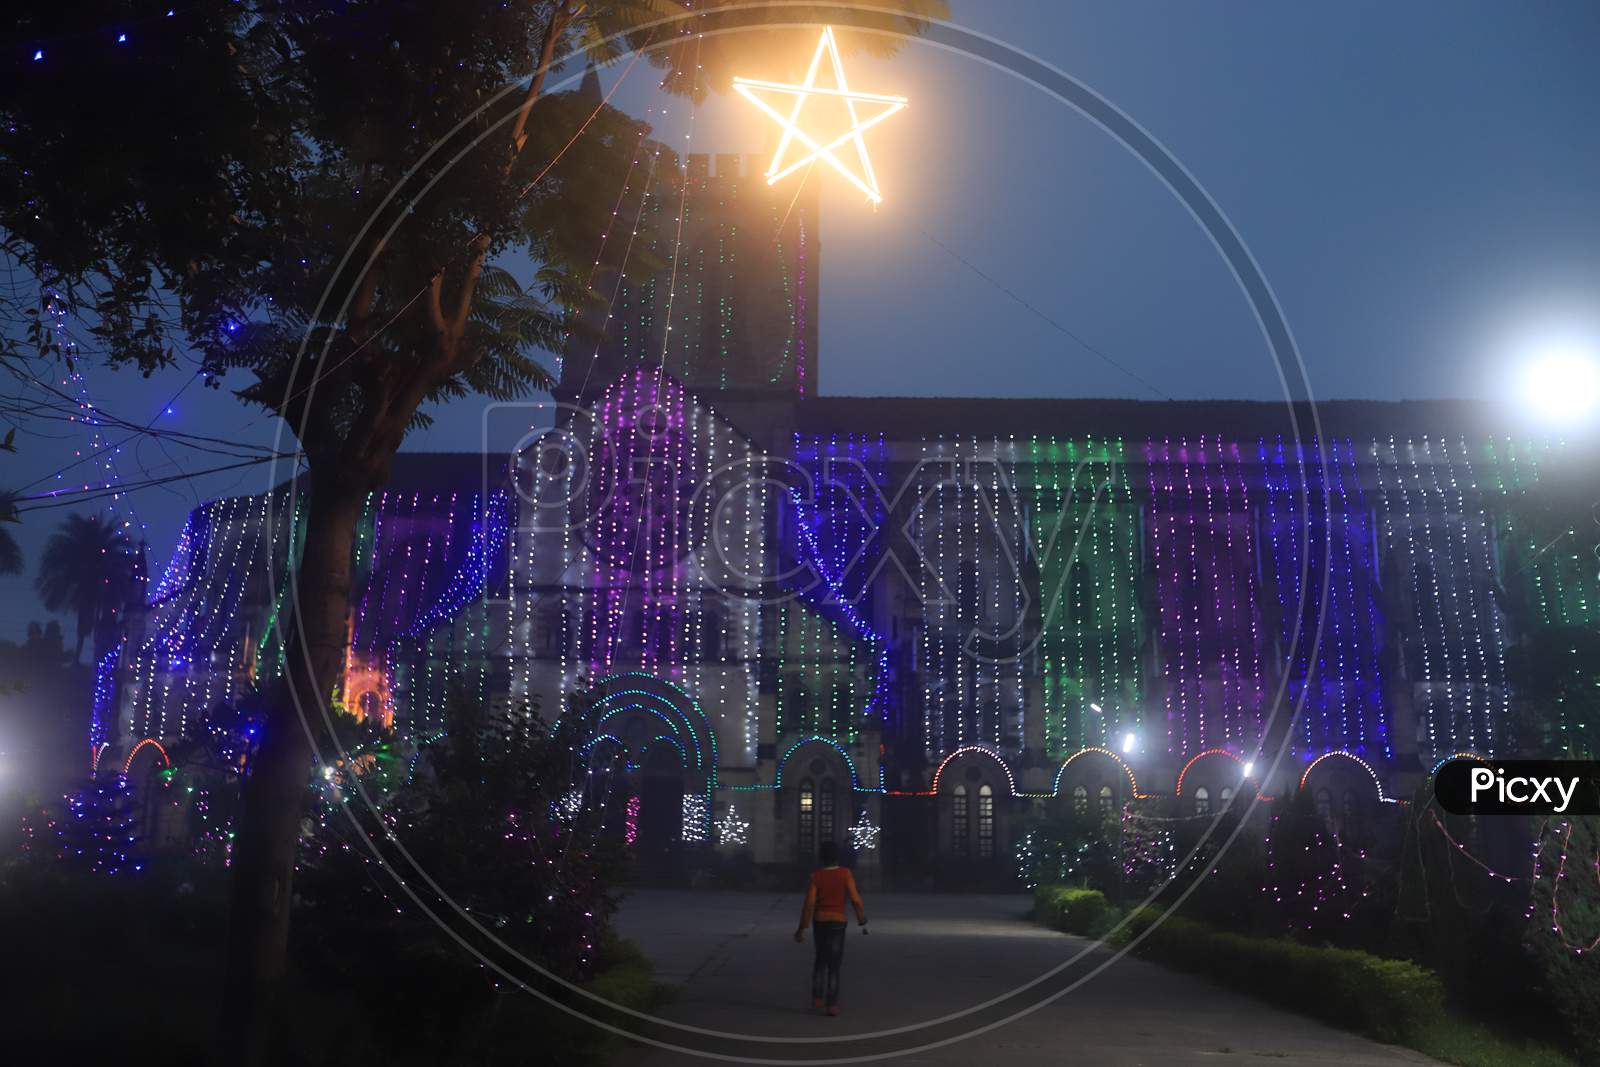 Church Decorated With Led Lights During Christmas Celebrations